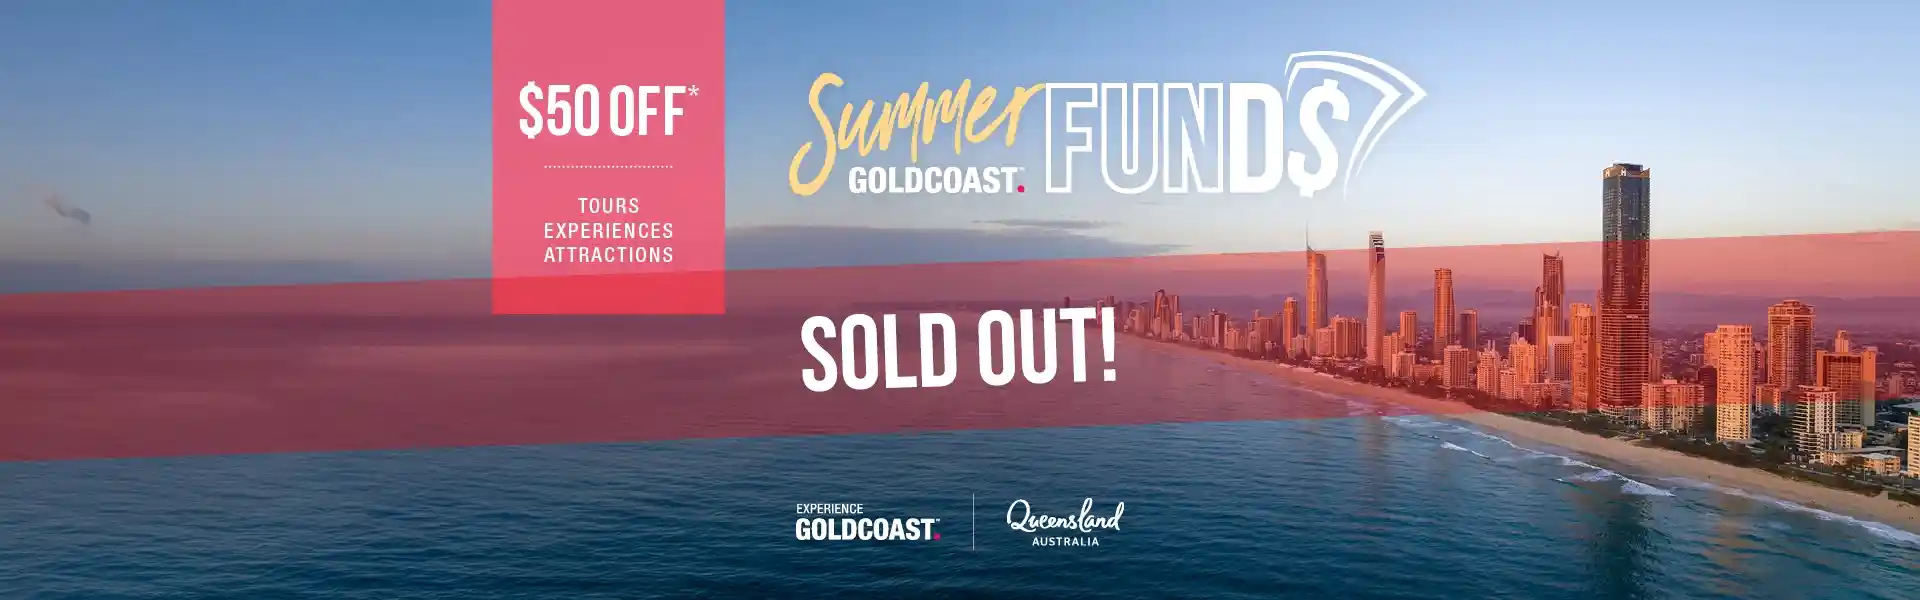 EGC GC Summer Funds - Sold Out Banner